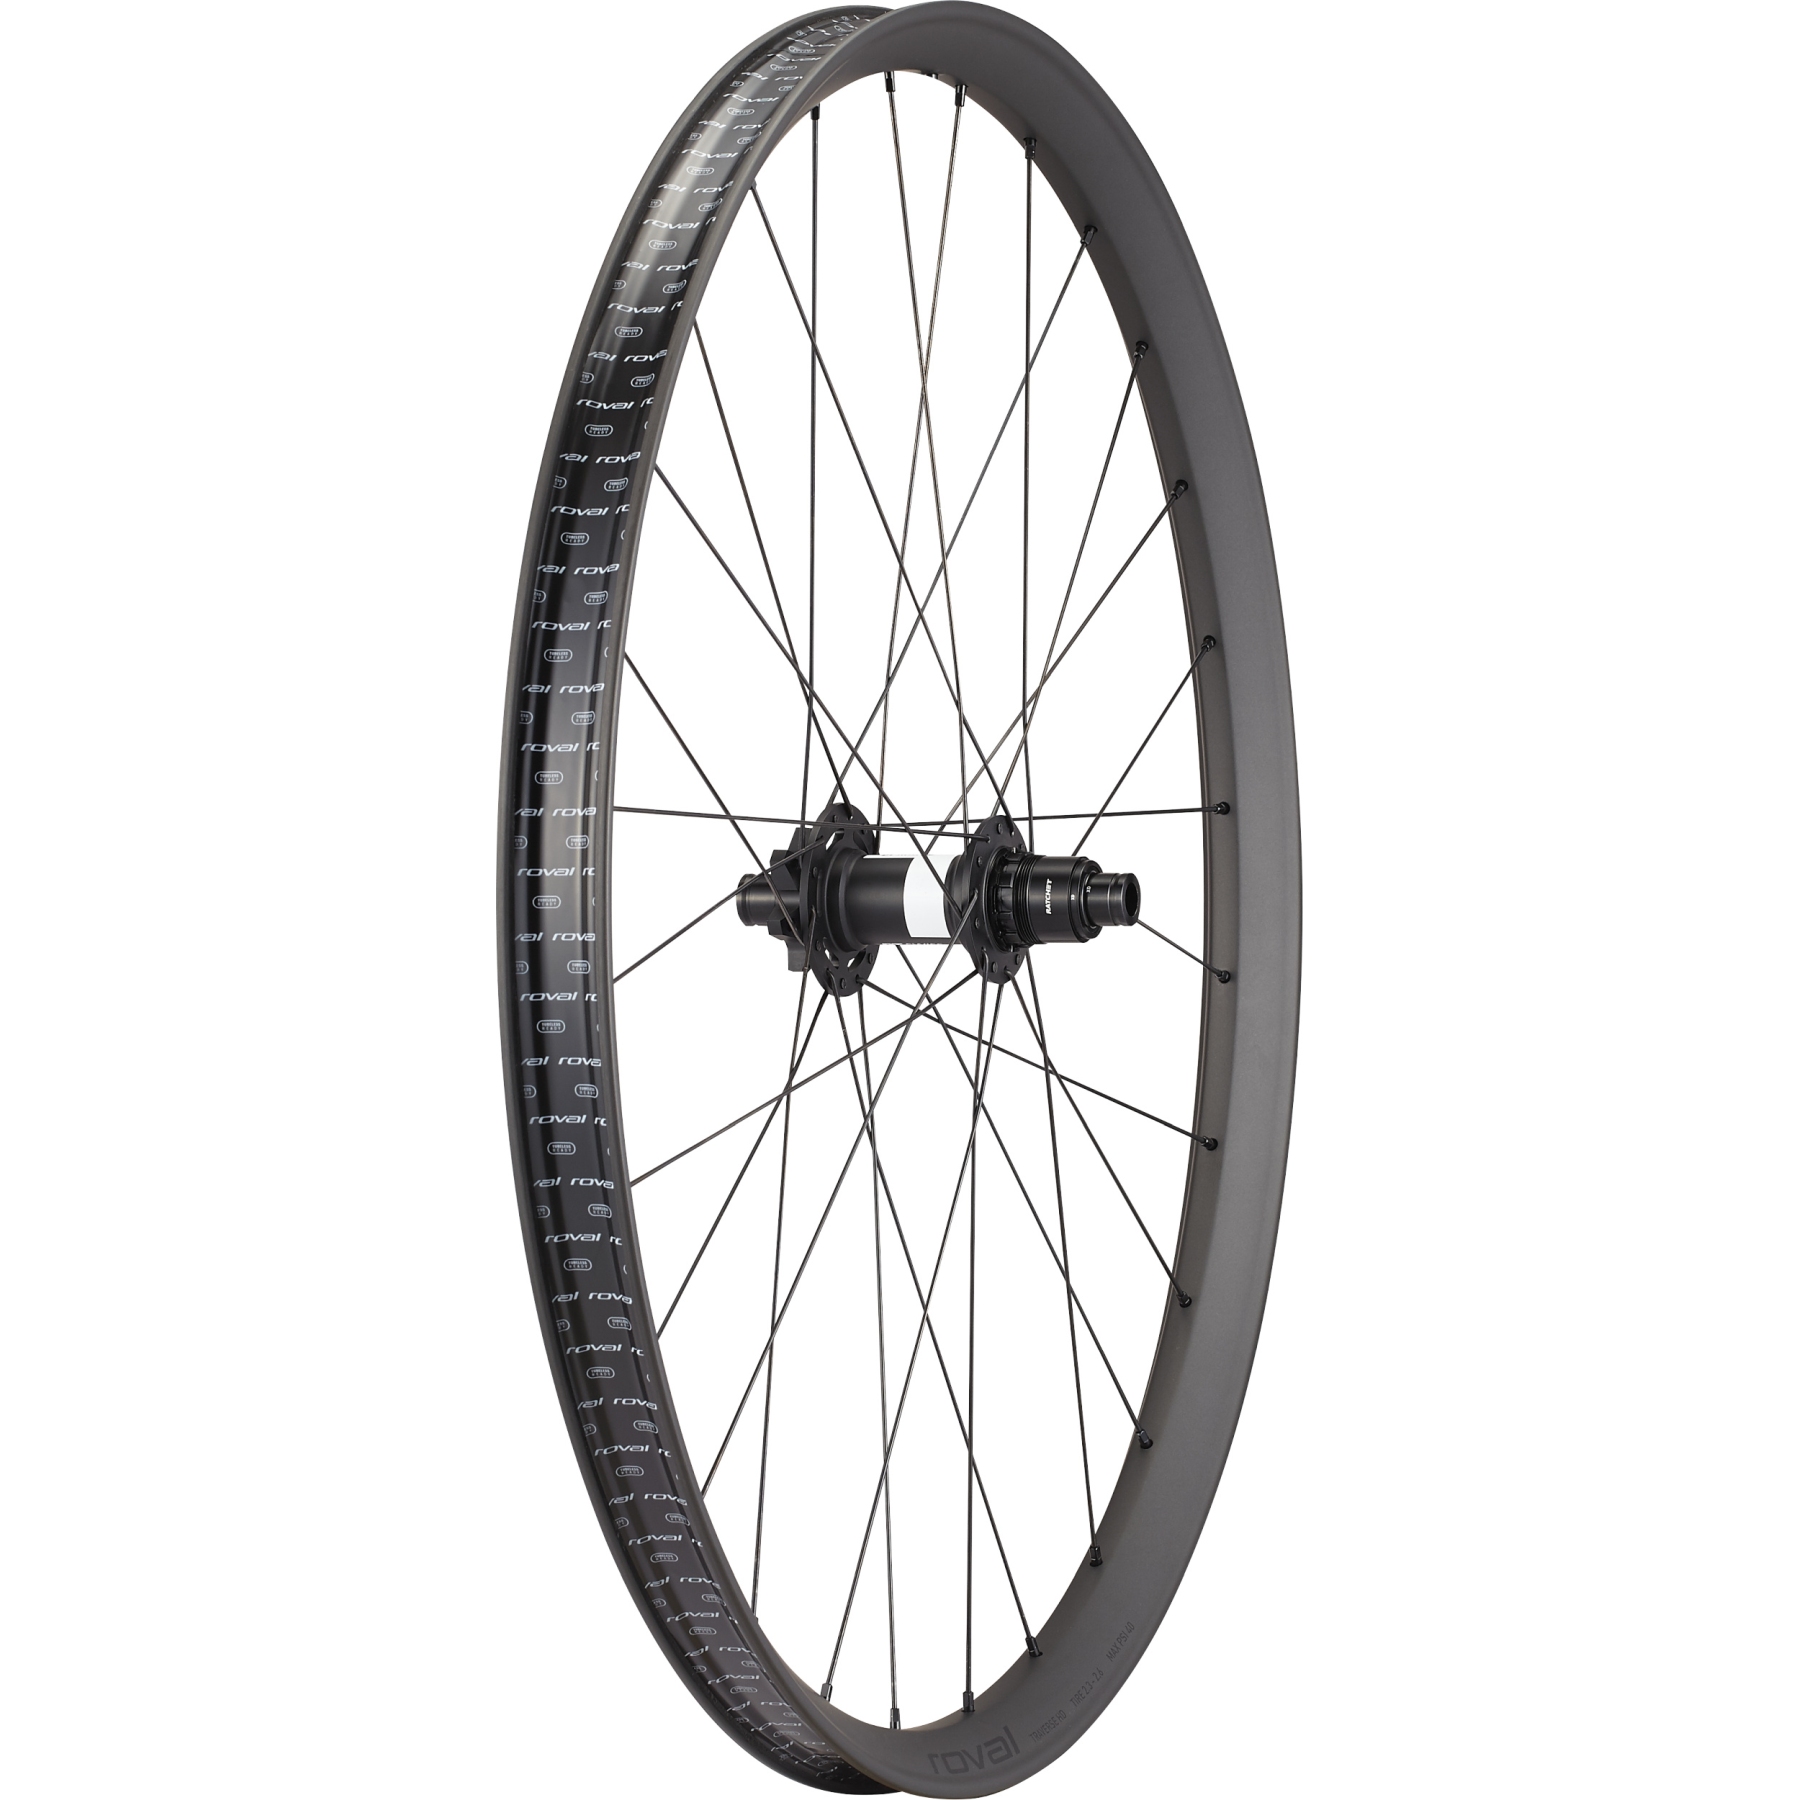 Image of Specialized Roval Traverse HD 350 Carbon Rear Wheel - 29" | 6-Bolt | 12x148mm - XD | Carbon/Black